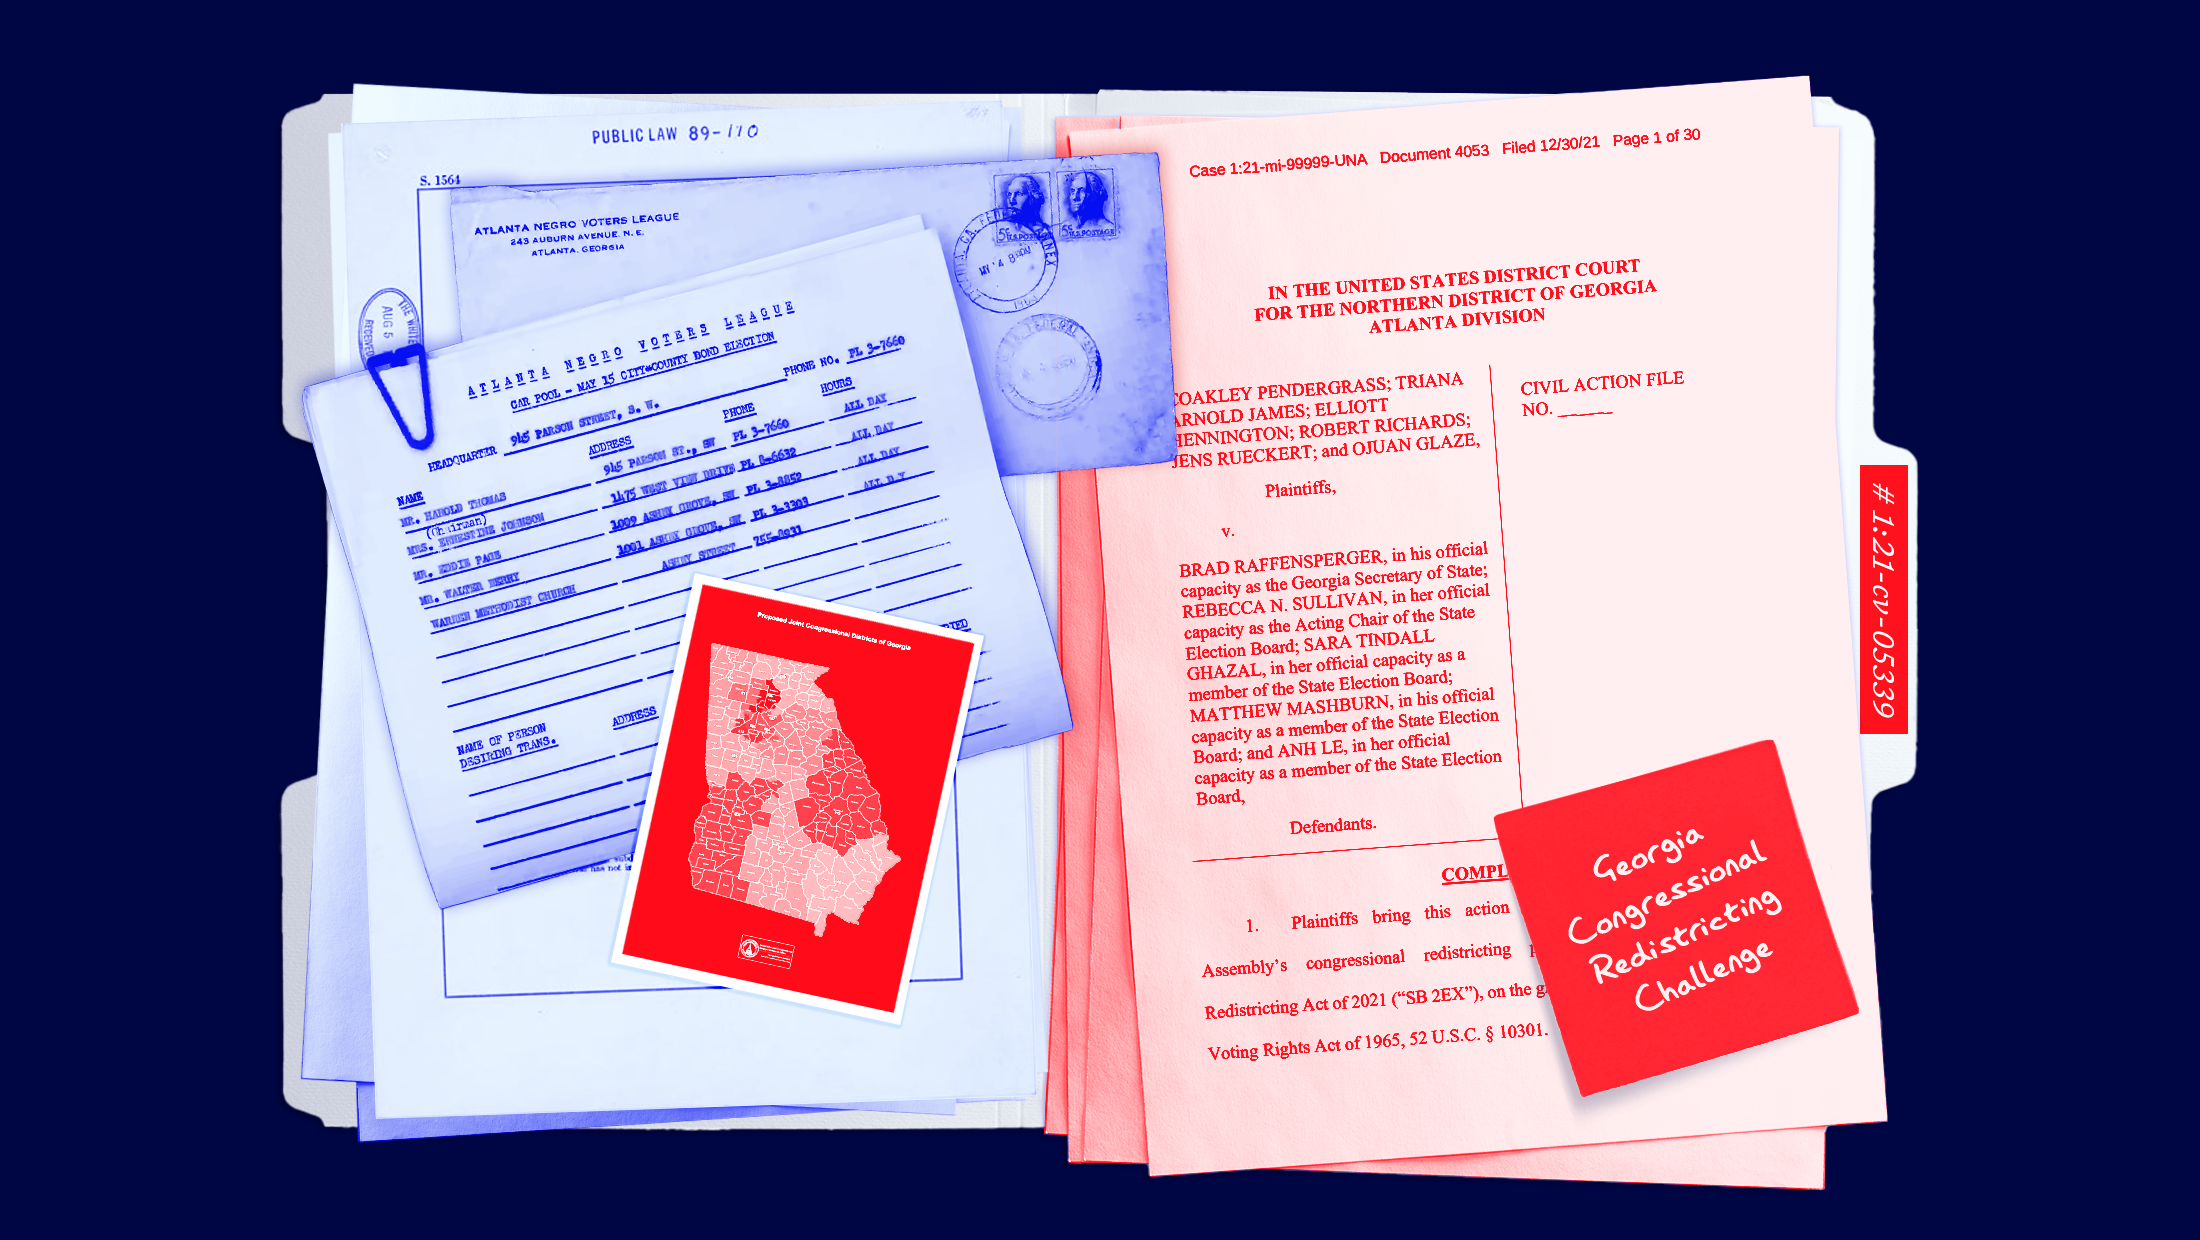 A binder with a blue side on the left depicting a bond election paper, a blue envelope and a red map of Georgias congressional districts. On the right side a red copy of the complaint in the Georgia Redistricting Challenge